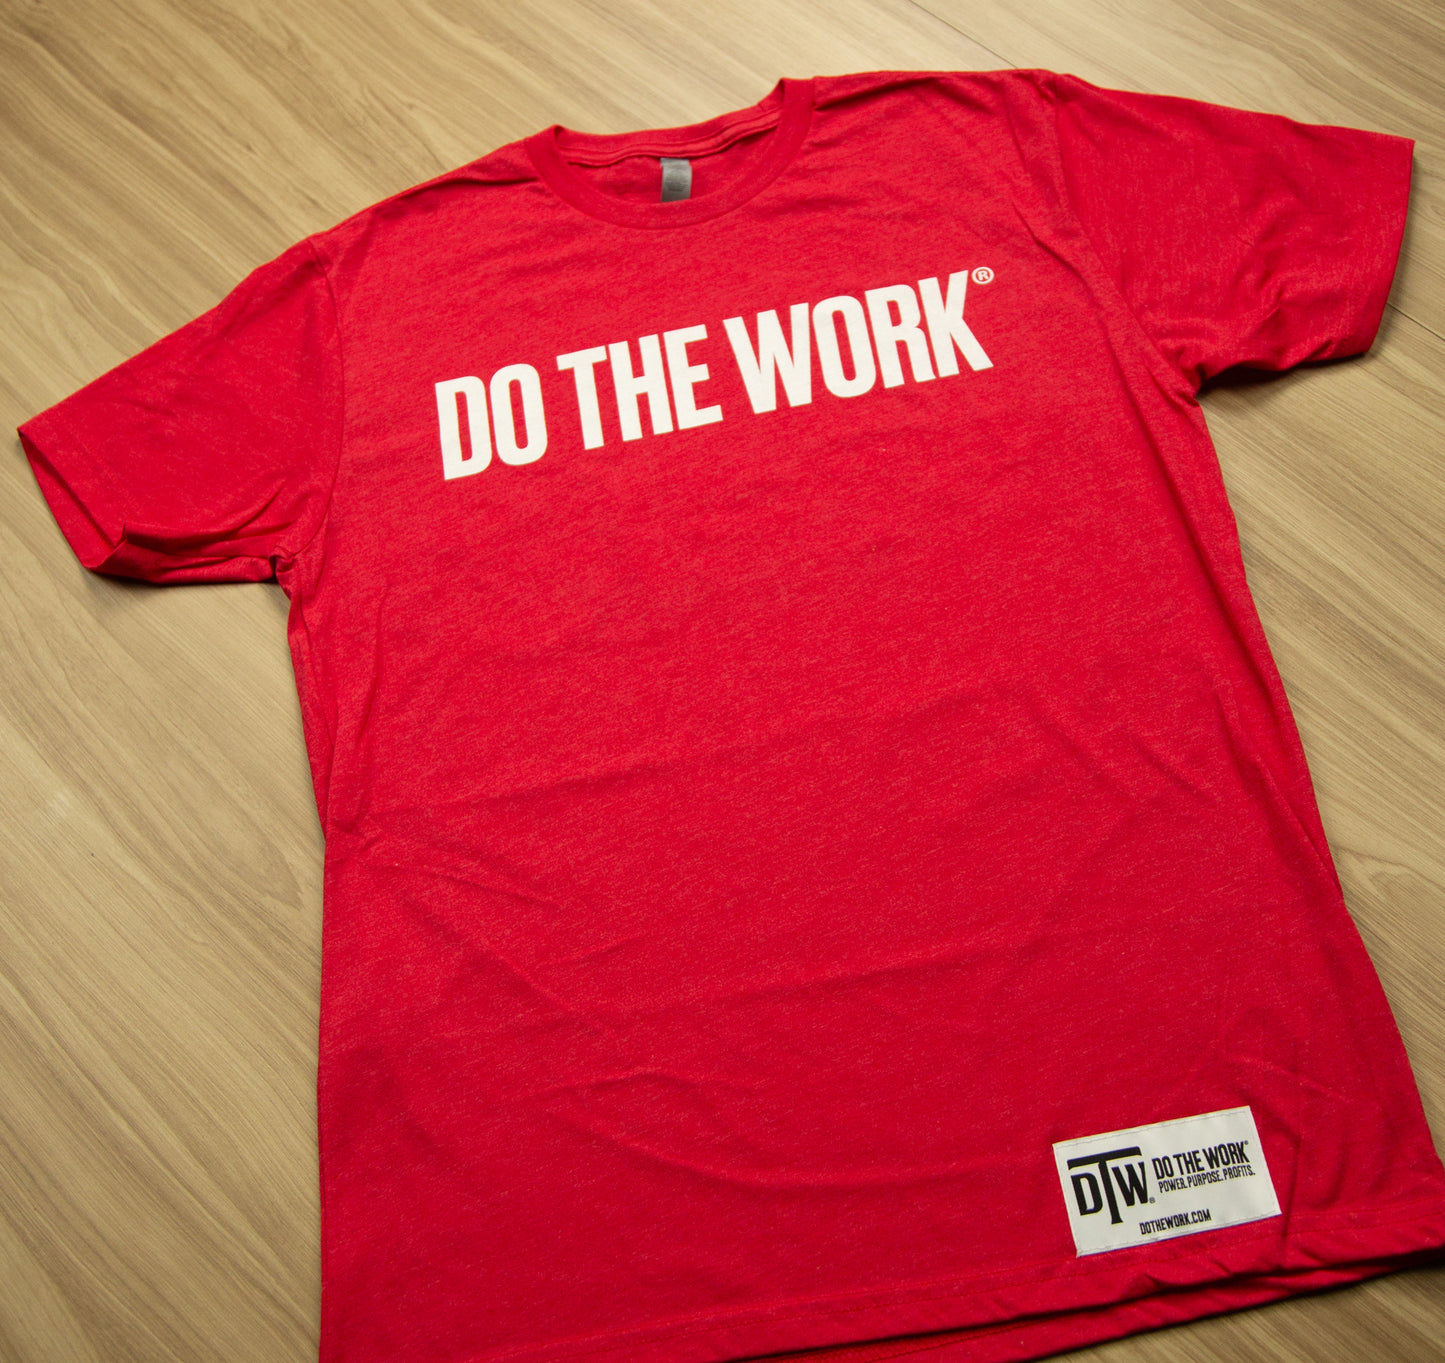 DO THE WORK® Red Tshirt W/ White Tag